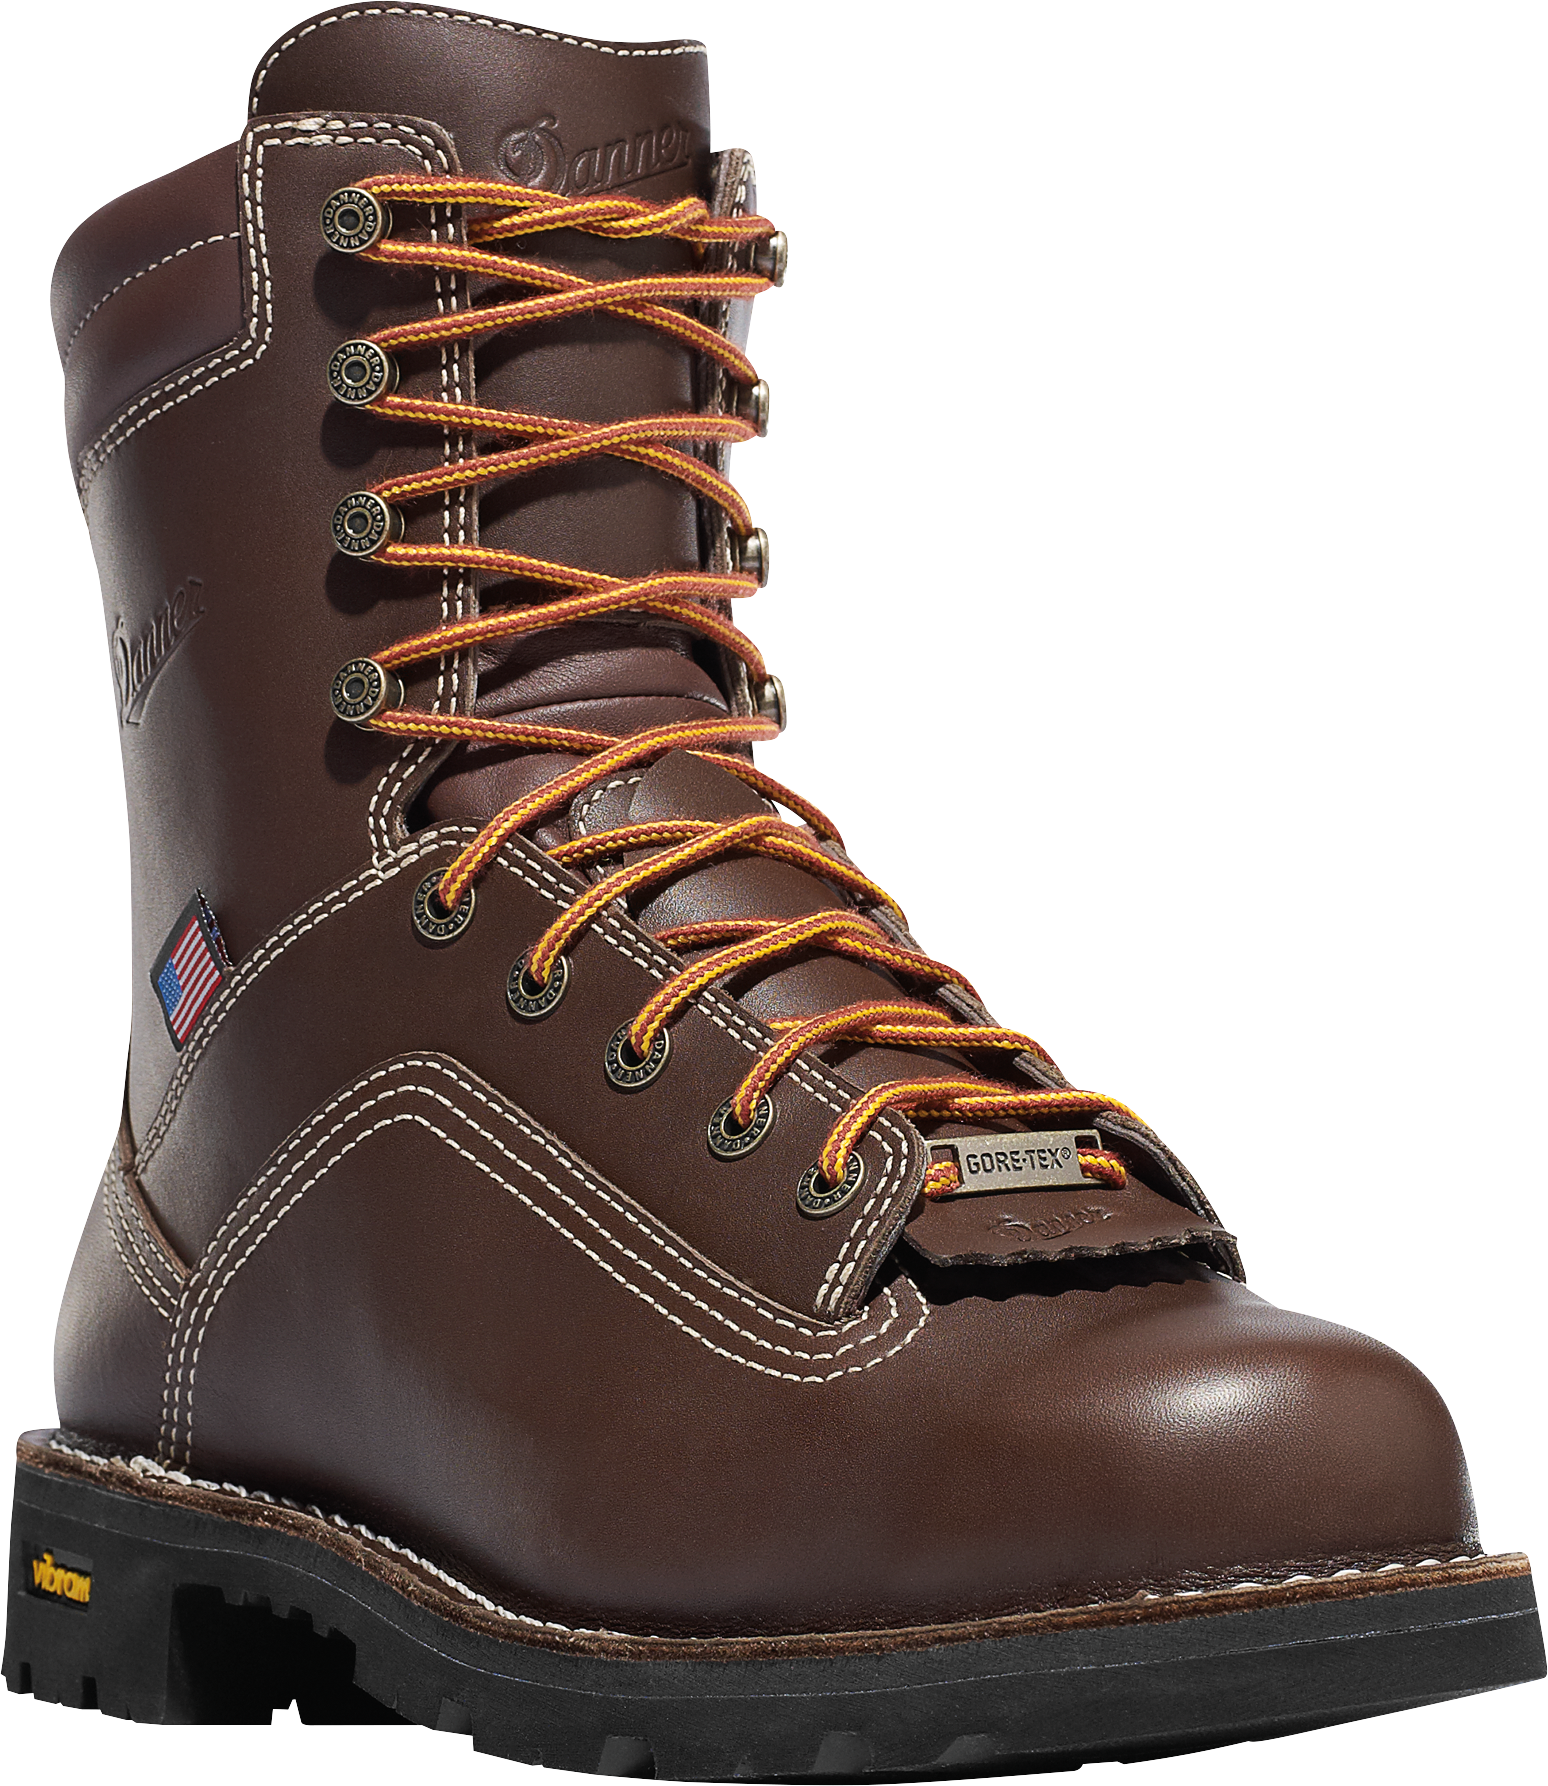 Danner Quarry USA GORE-TEX Work Boots for Men - Brown - 7.5W